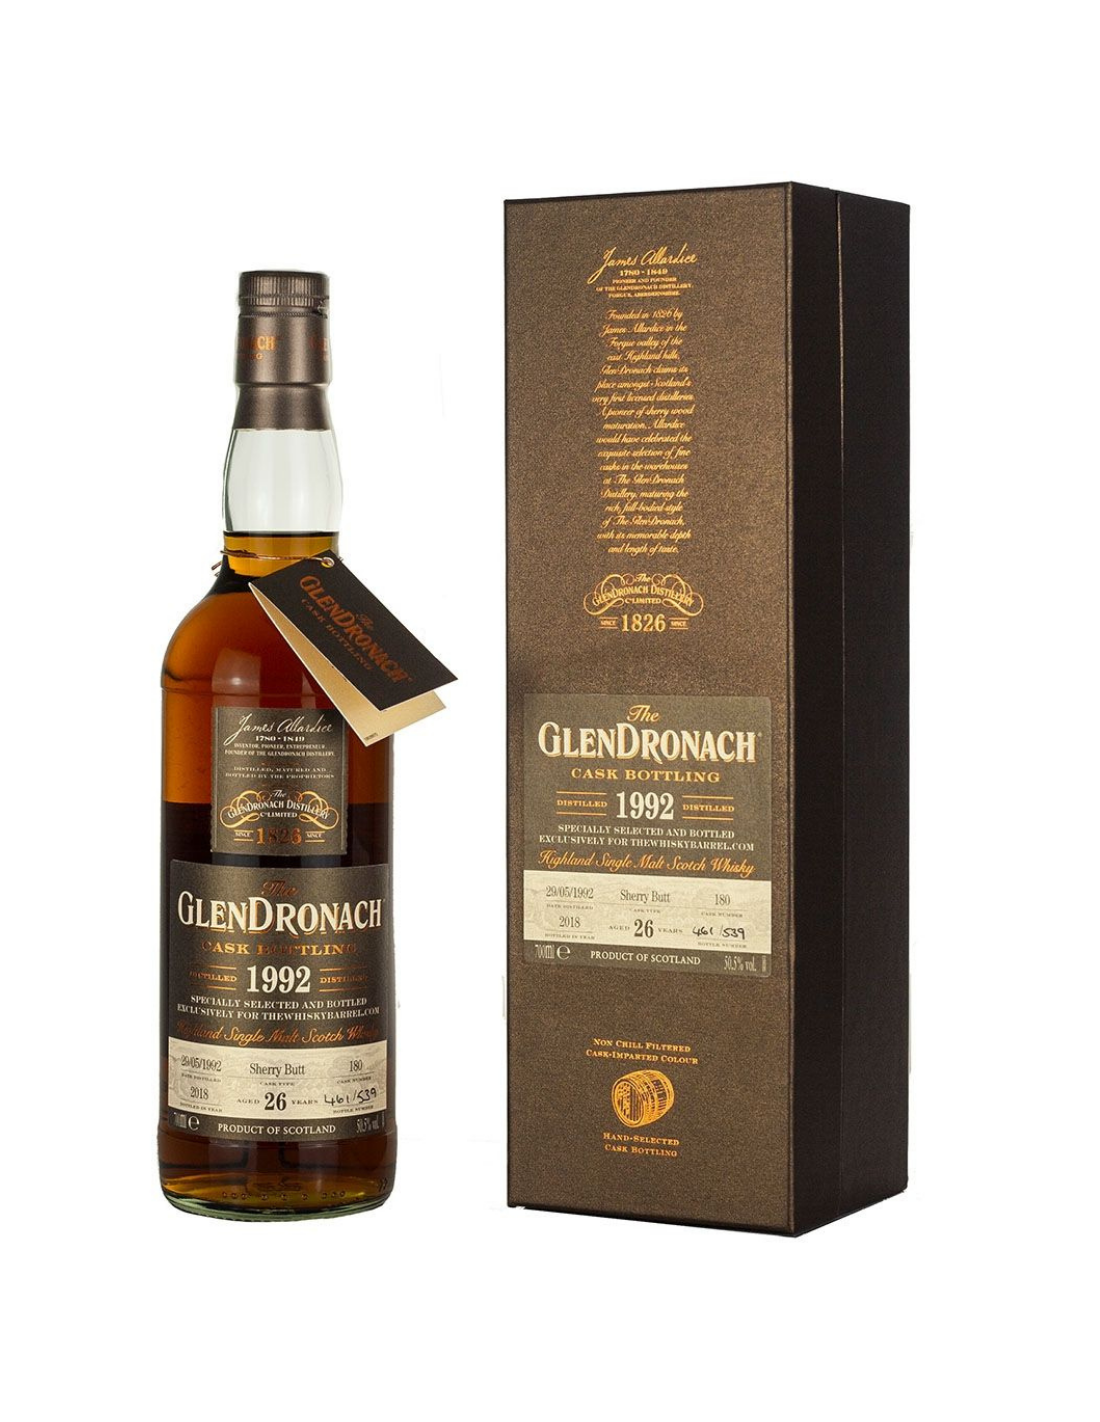 Whisky The Glendronach 26 Years 1992 PX Puncheon The Chronicles, 0.7L, 51.8% alc., Scotia alcooldiscount.ro